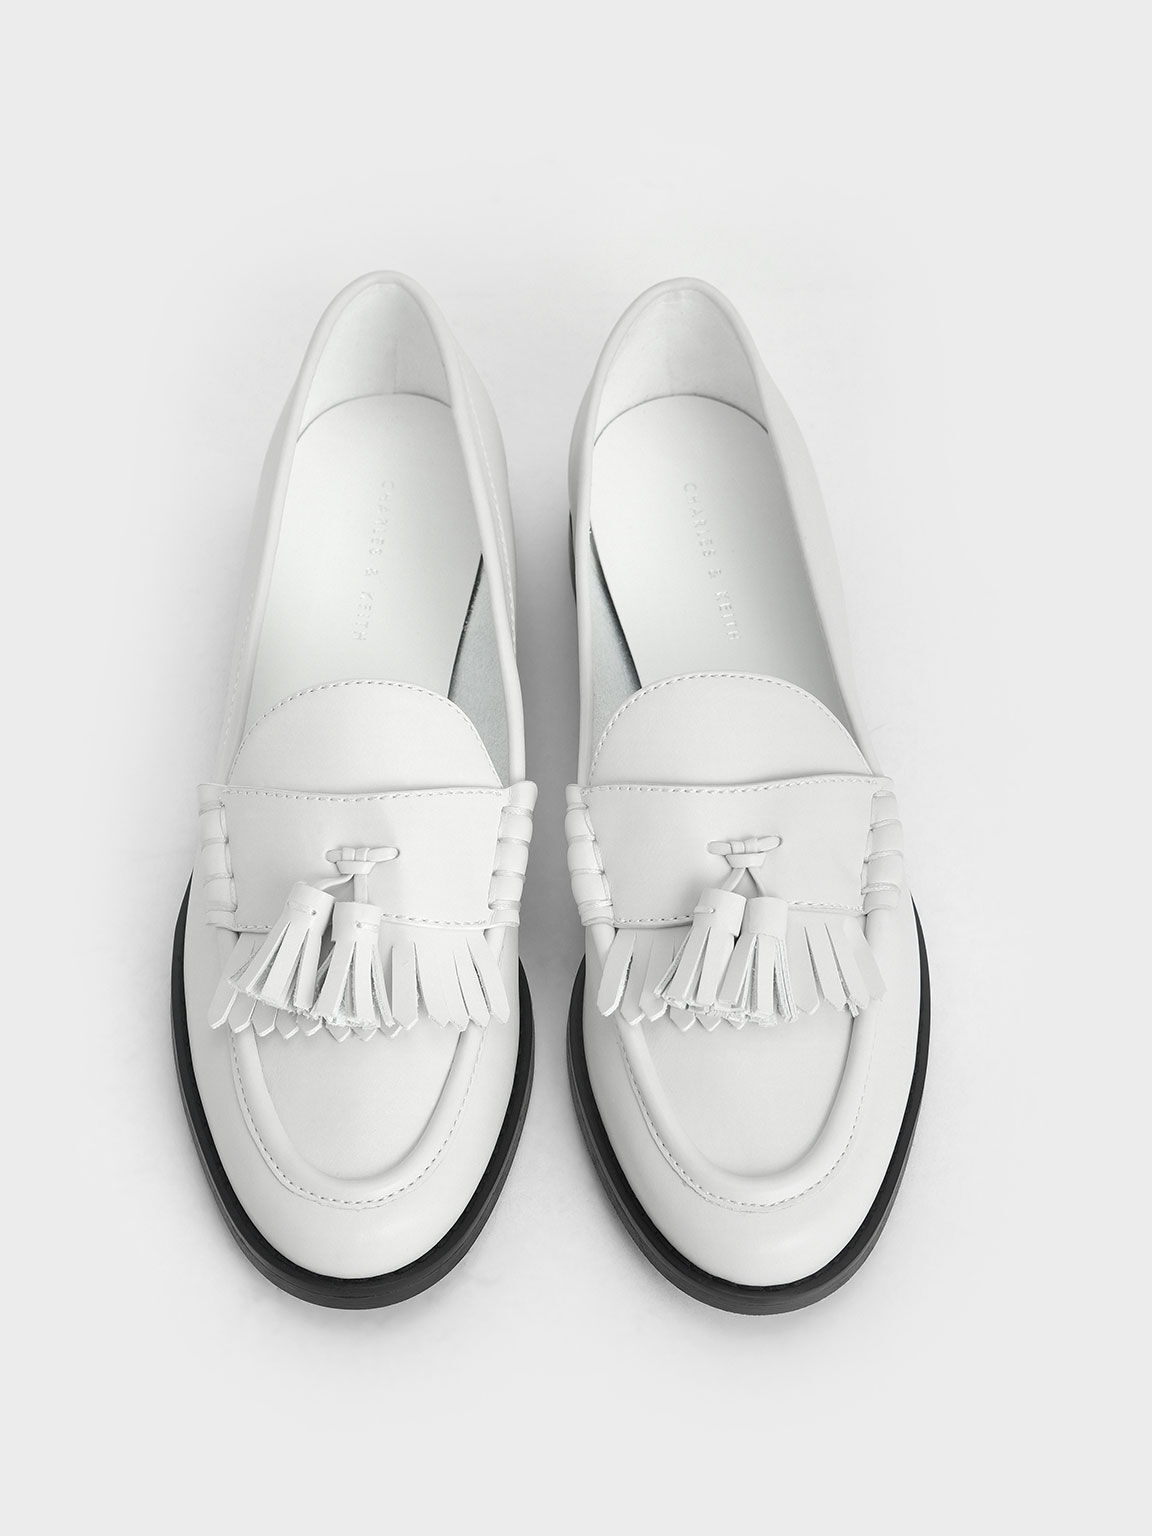 Tassel Penny Loafers, White, hi-res